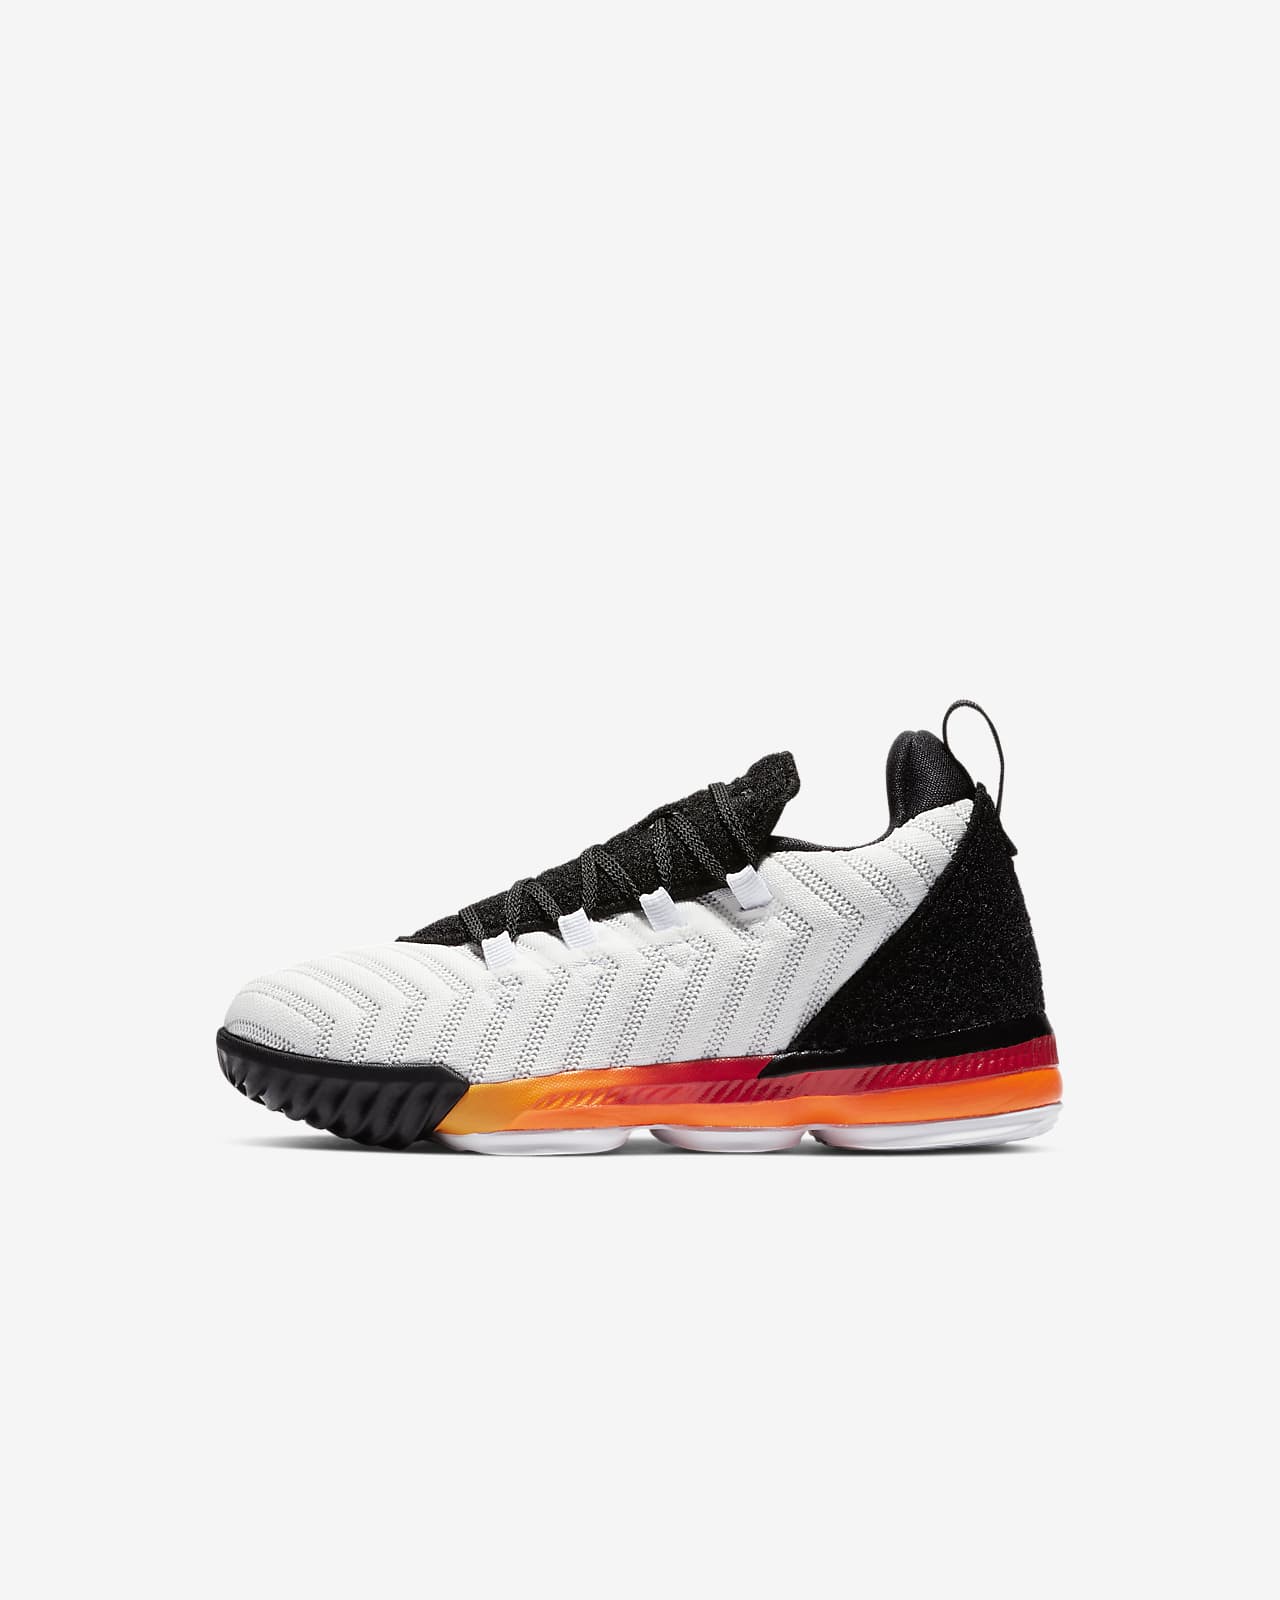 lebron 16 fit true to size